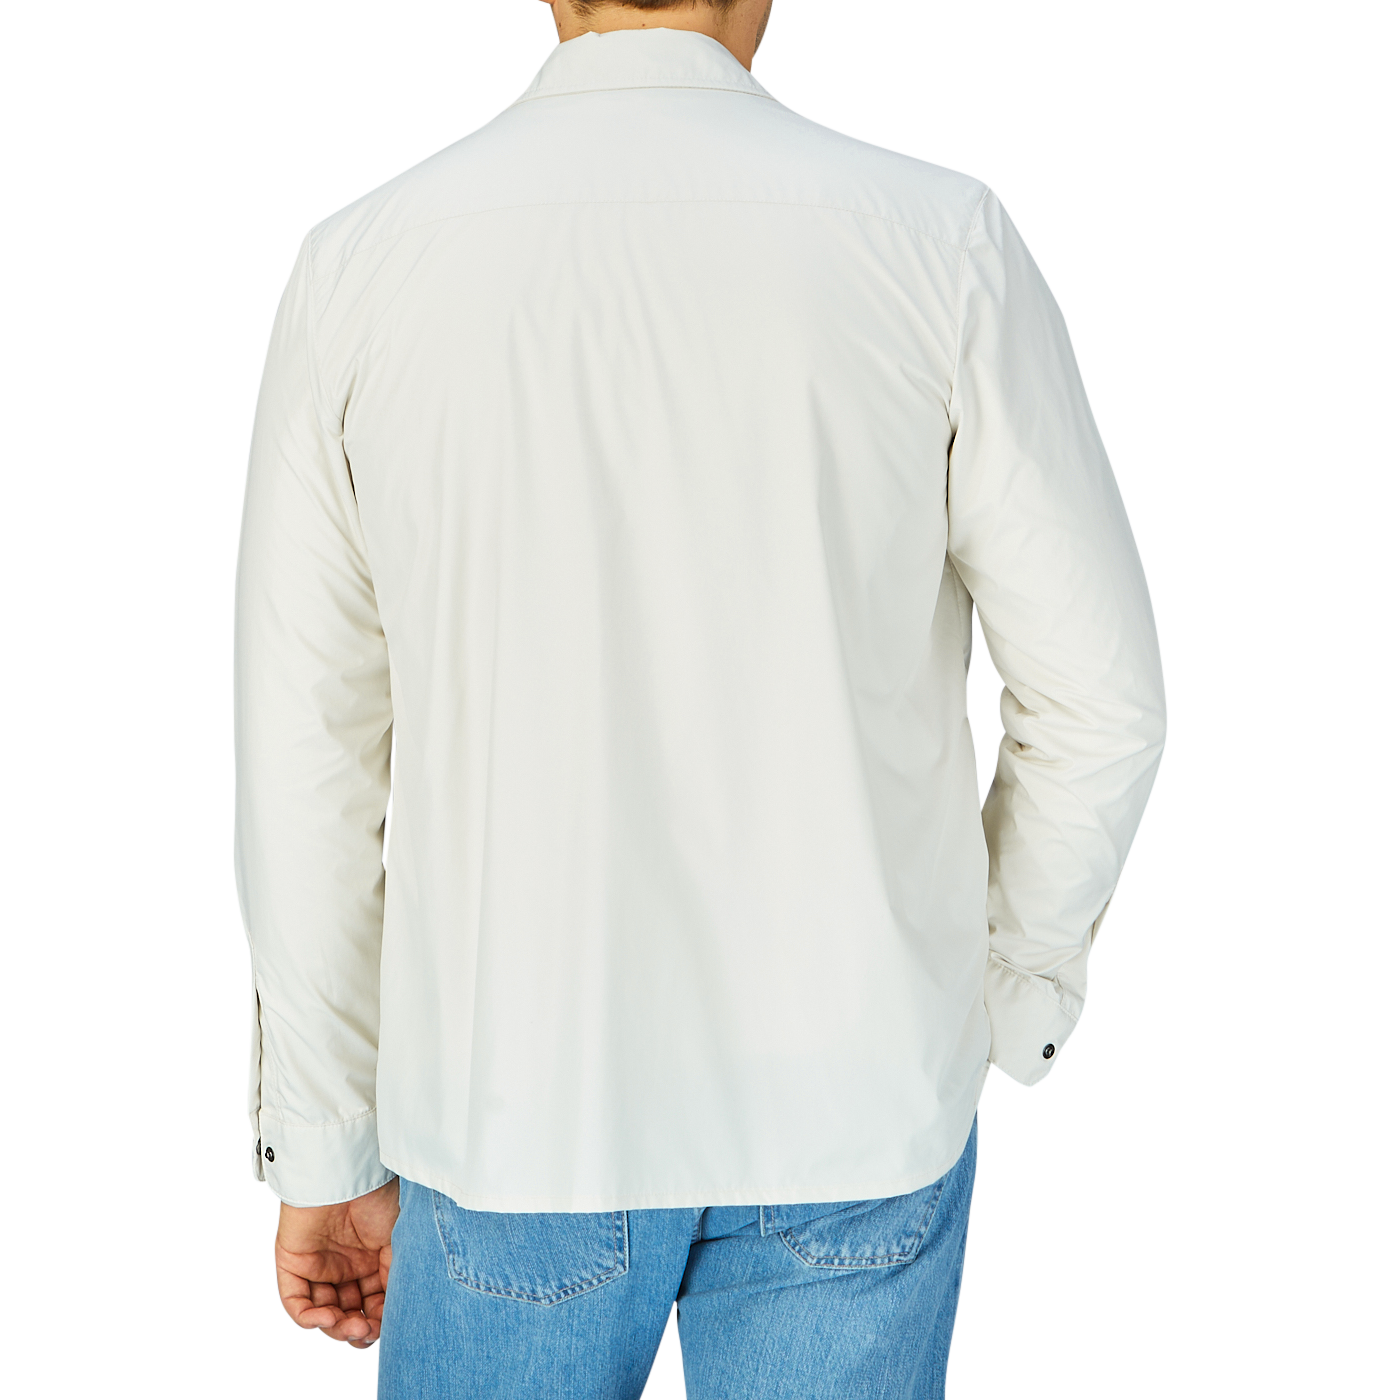 Man wearing a white shirt and blue jeans viewed from behind, covered by a slim fit Off-White Nylon Water Resistant Overshirt by Mazzarelli.